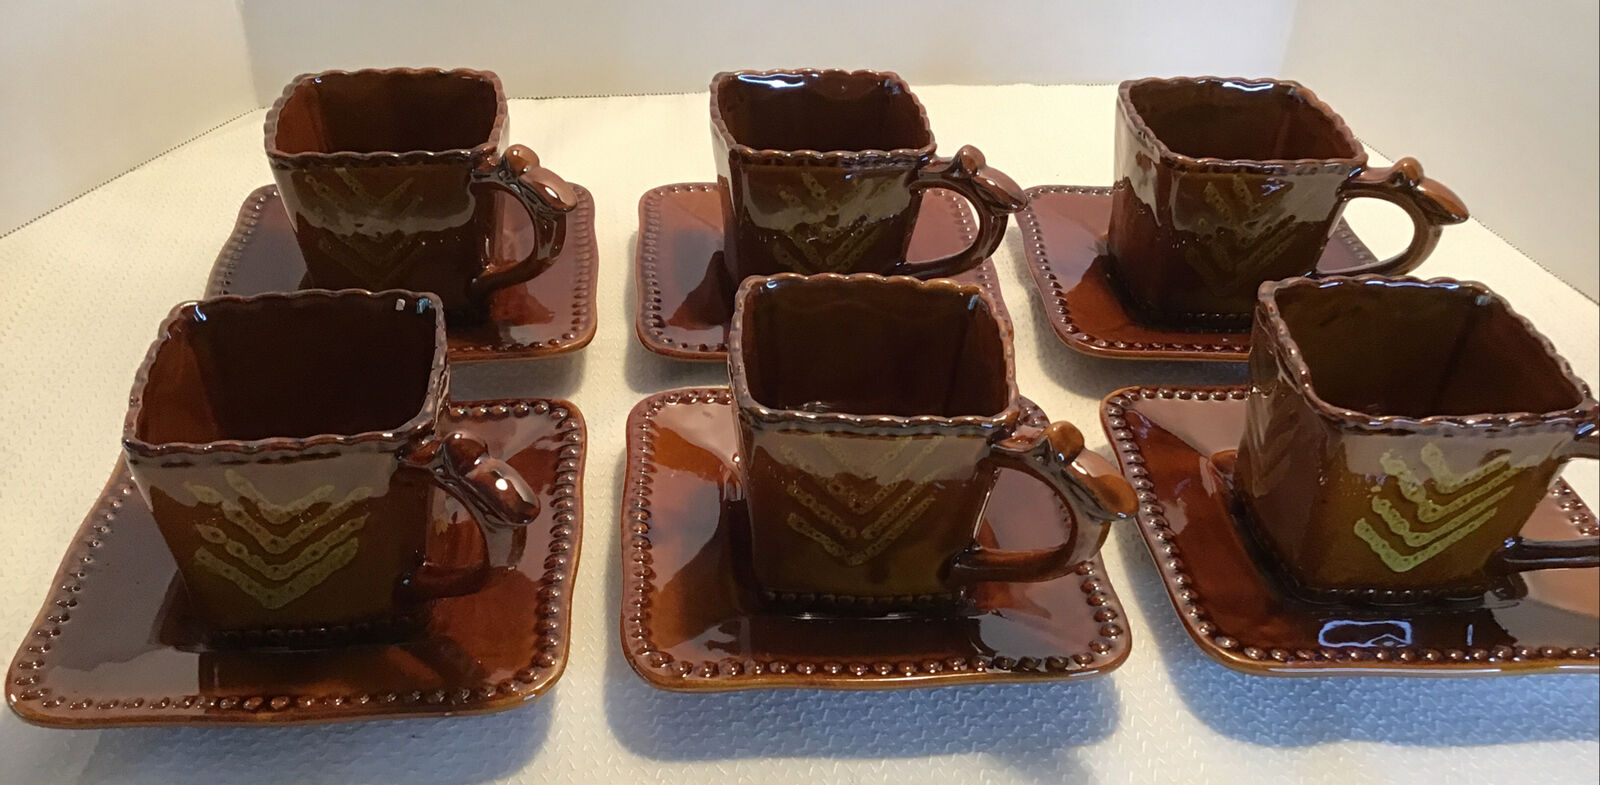 Coffee Cup And Saucer Set Pottery, Golden Star Imports, Dark Brown/ Gold 12 Pc.